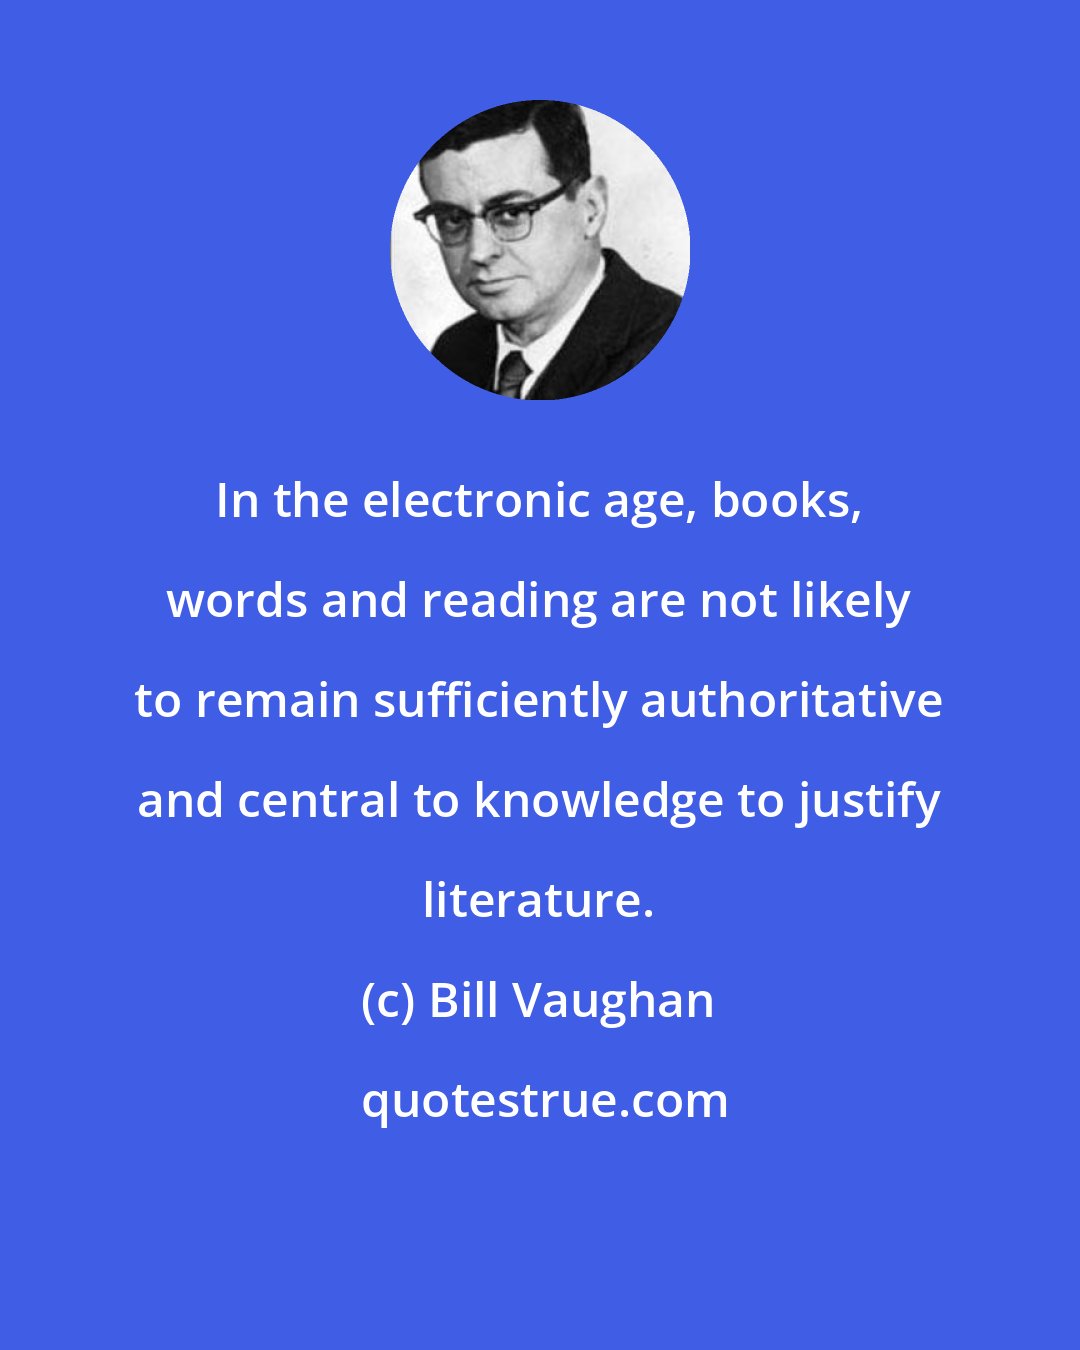 Bill Vaughan: In the electronic age, books, words and reading are not likely to remain sufficiently authoritative and central to knowledge to justify literature.